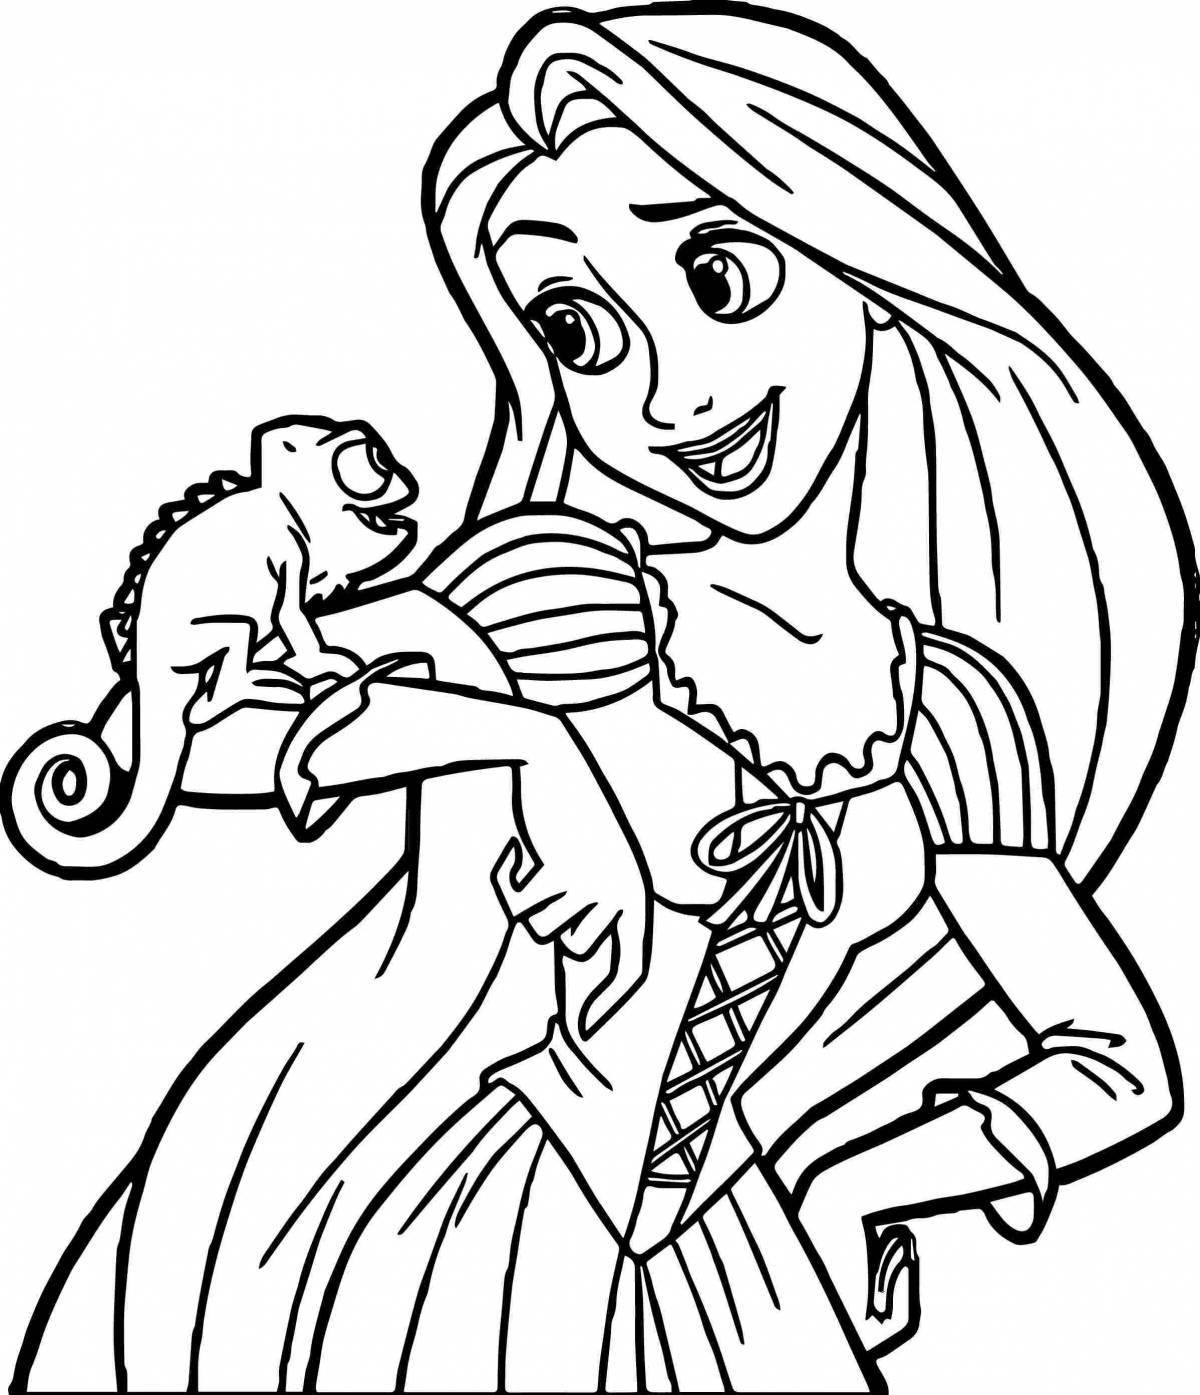 Bright coloring drawing of rapunzel